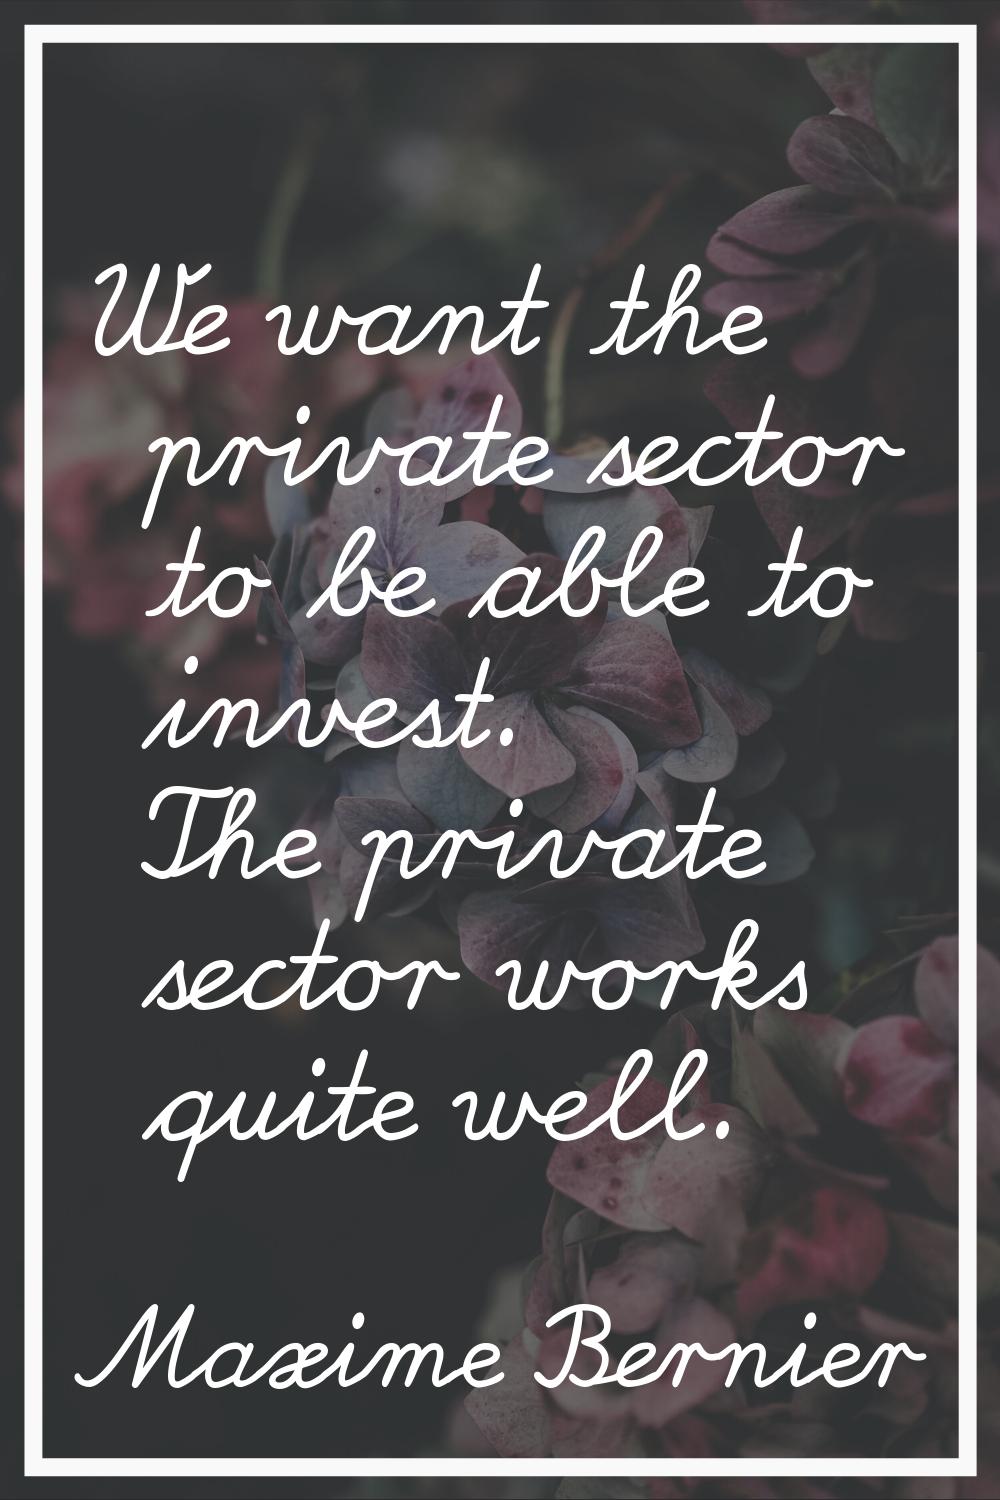 We want the private sector to be able to invest. The private sector works quite well.